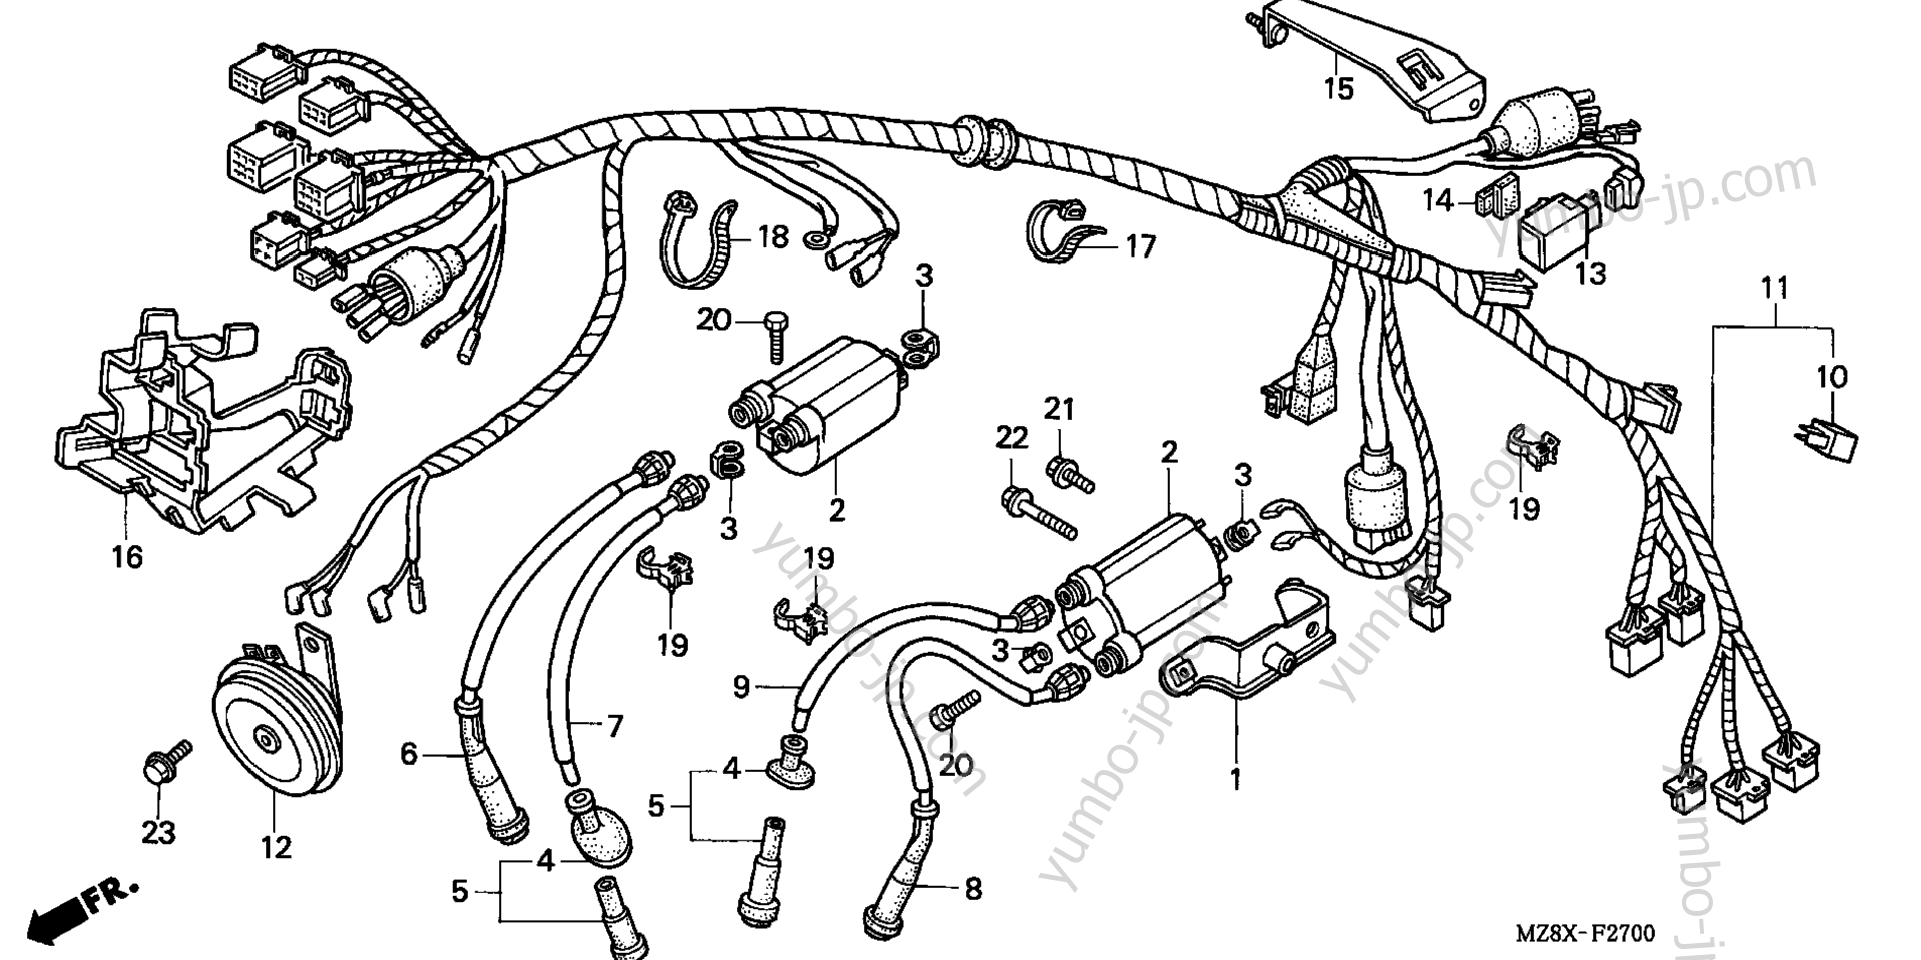 WIRE HARNESS for motorcycles HONDA VT600C A/B 2002 year